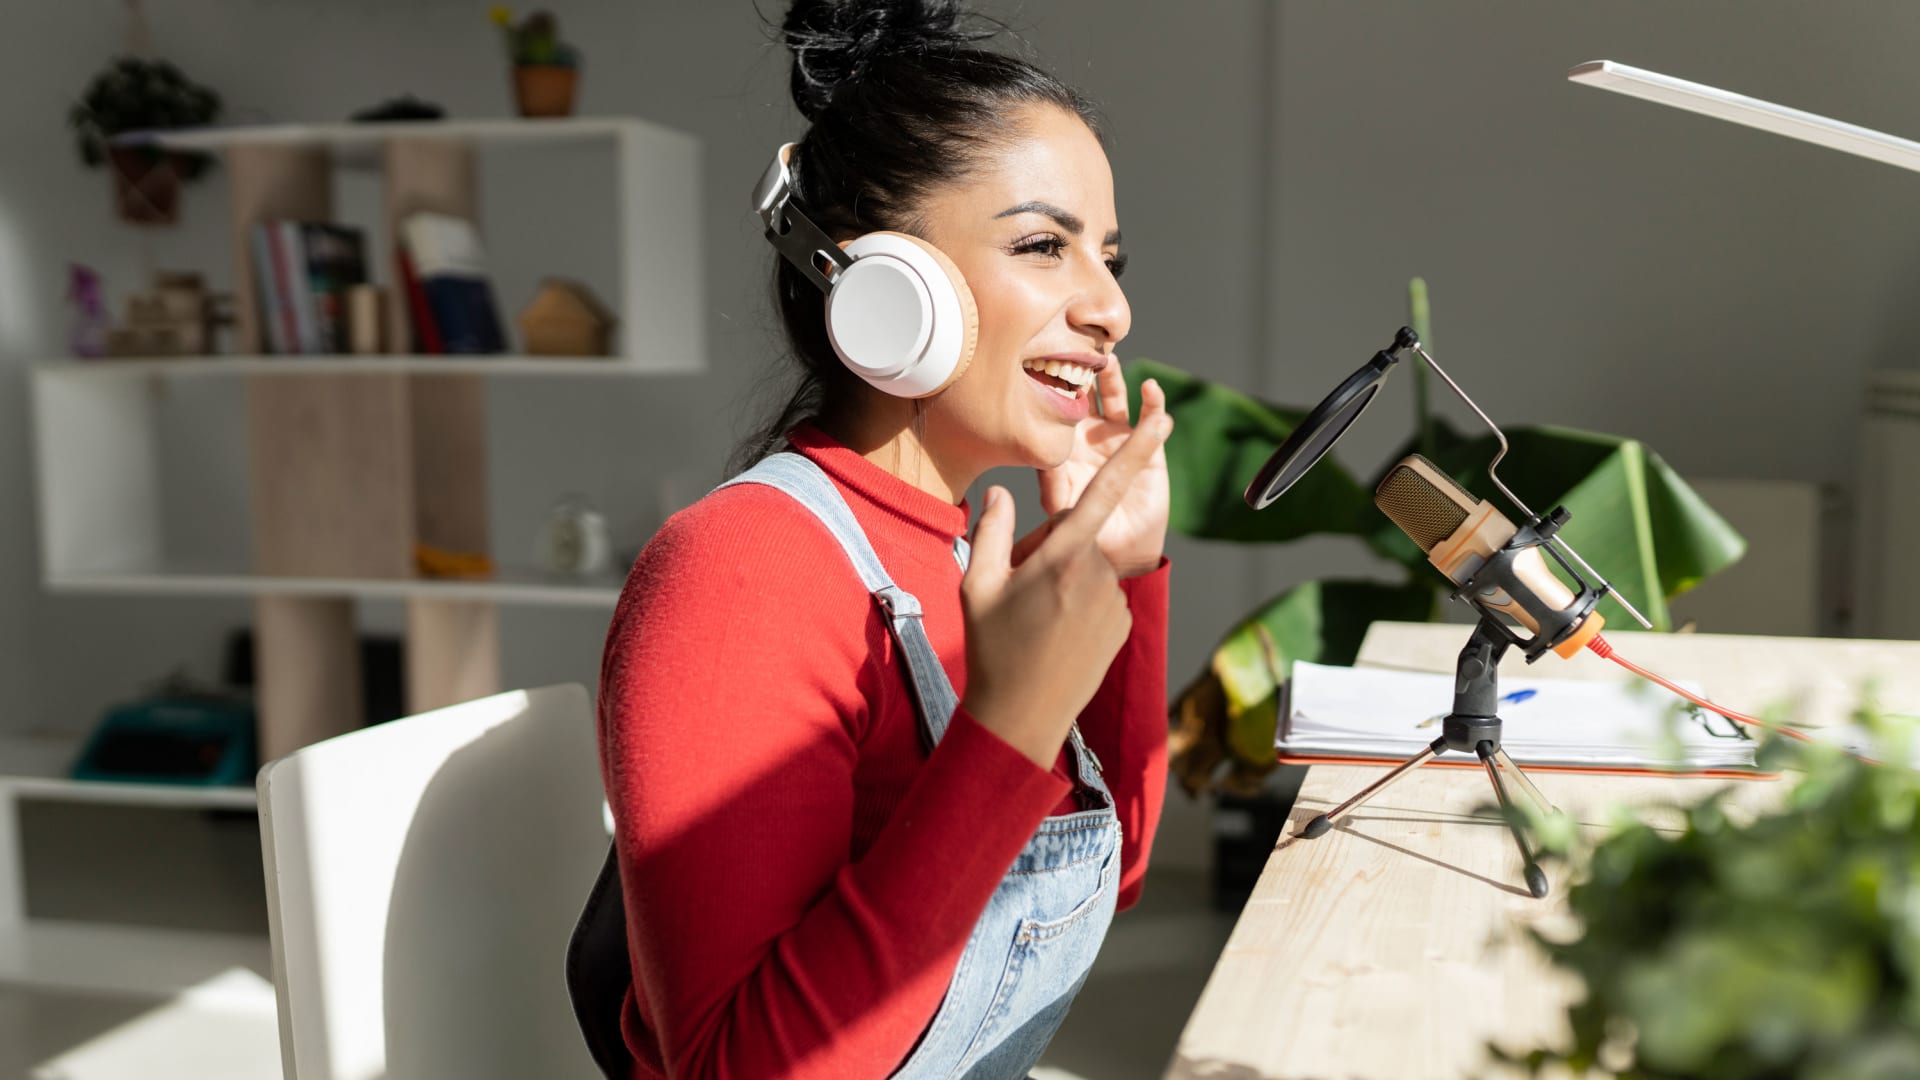 4 Non-Negotiables for Starting a Successful Podcast